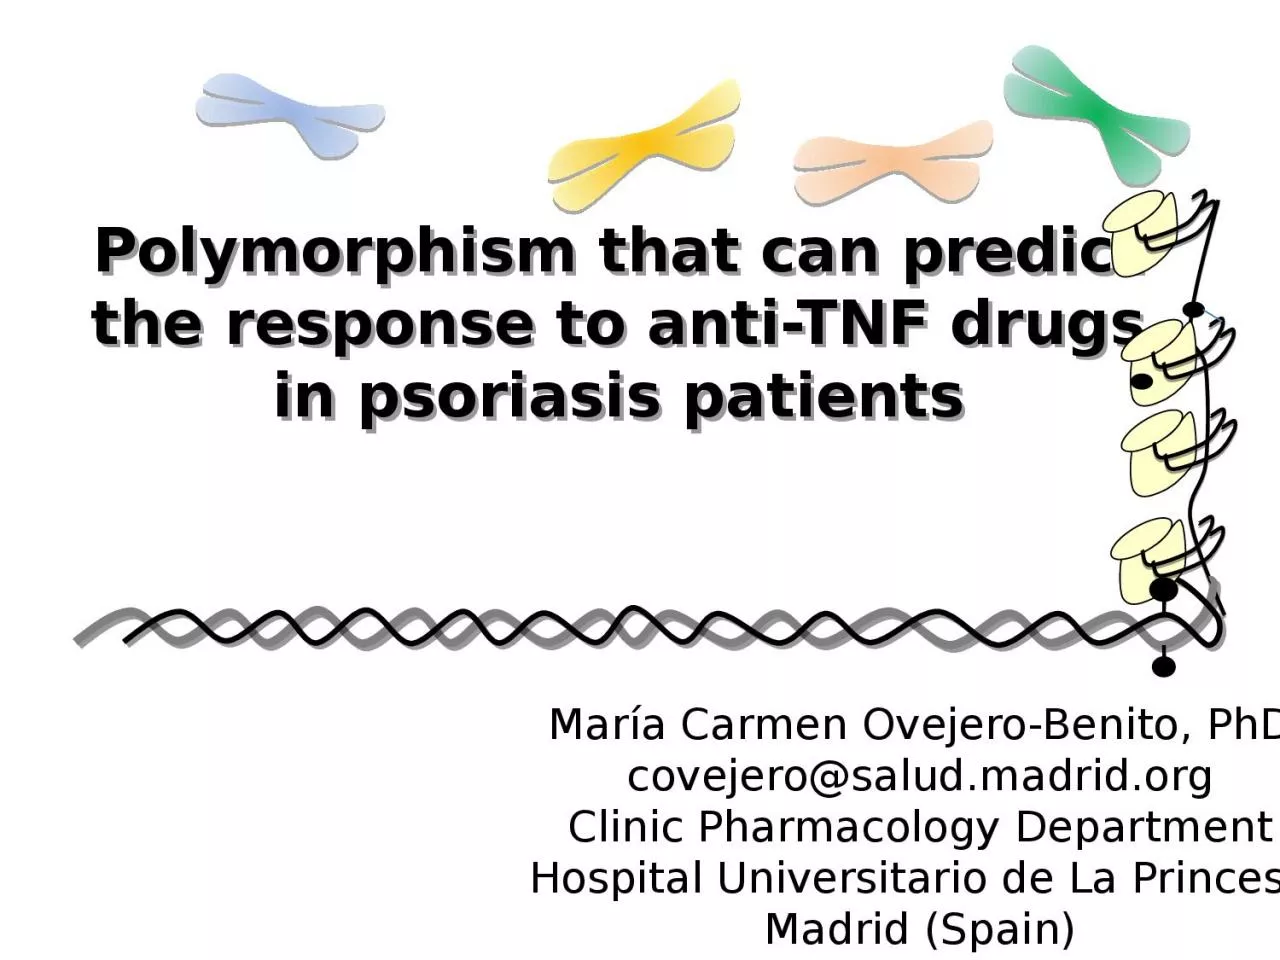 Polymorphism that can predict the response to anti-TNF drugs in psoriasis patients